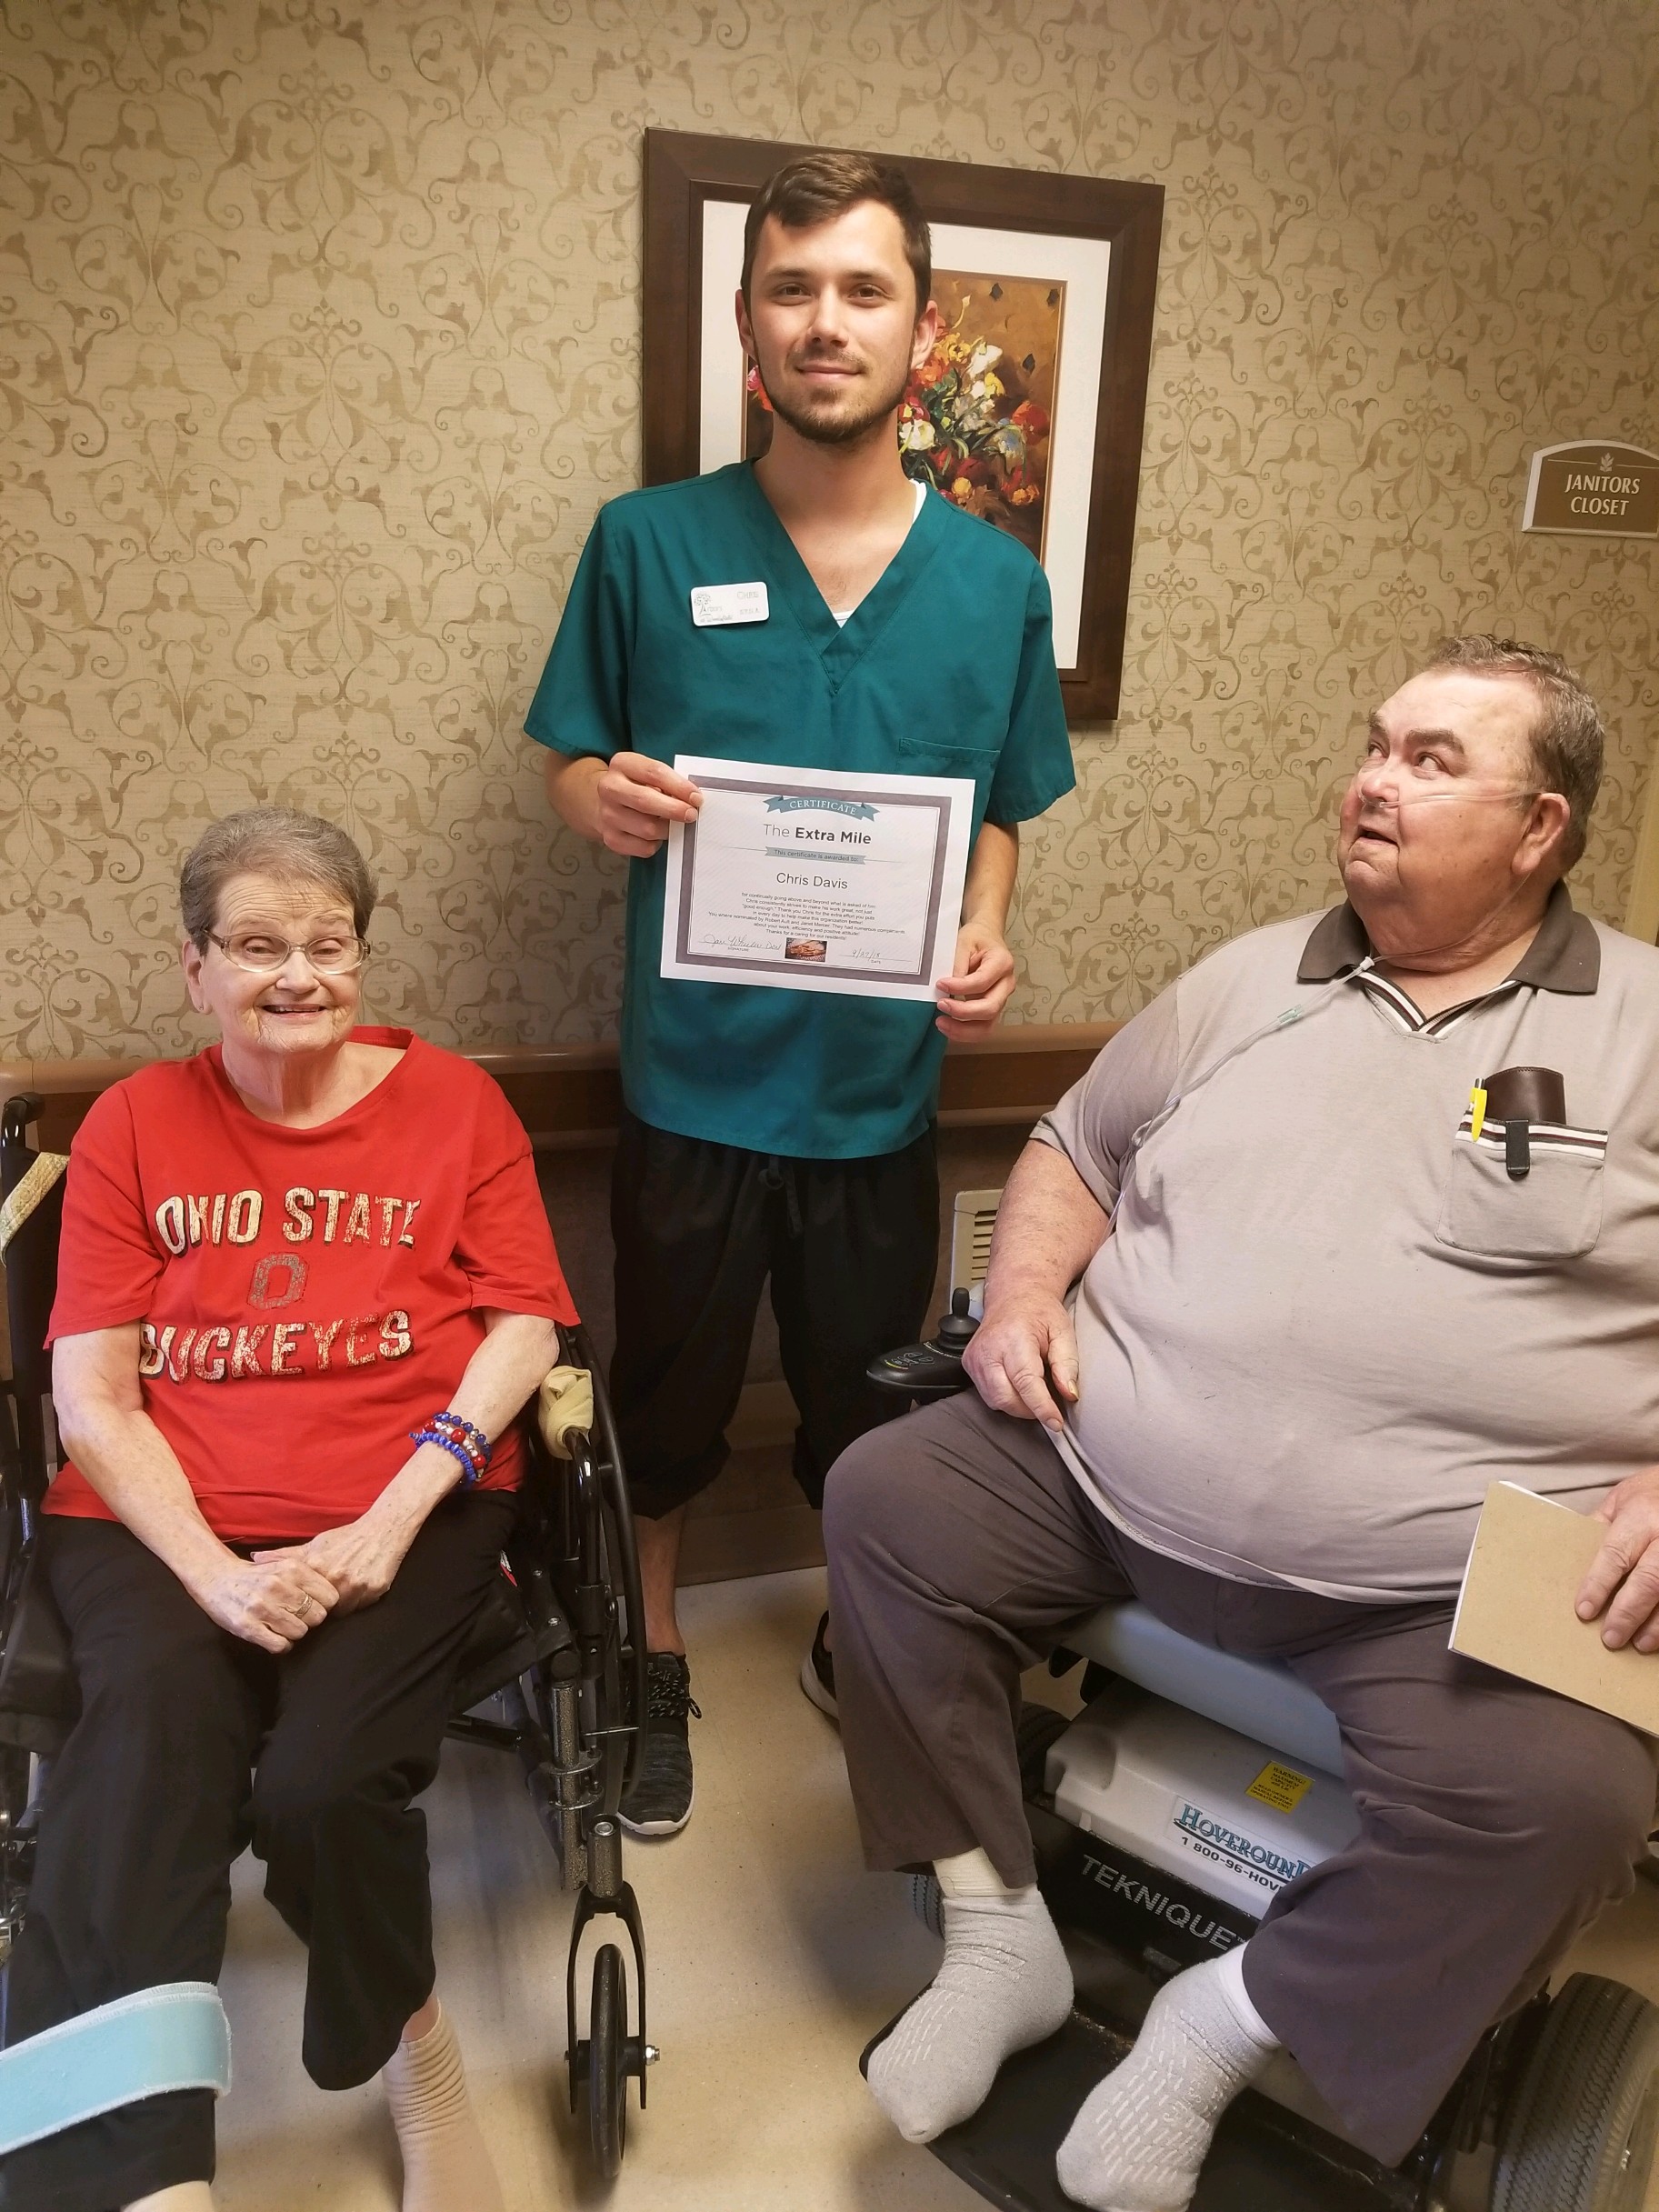 Chris David with Extra Mile Award and two residents